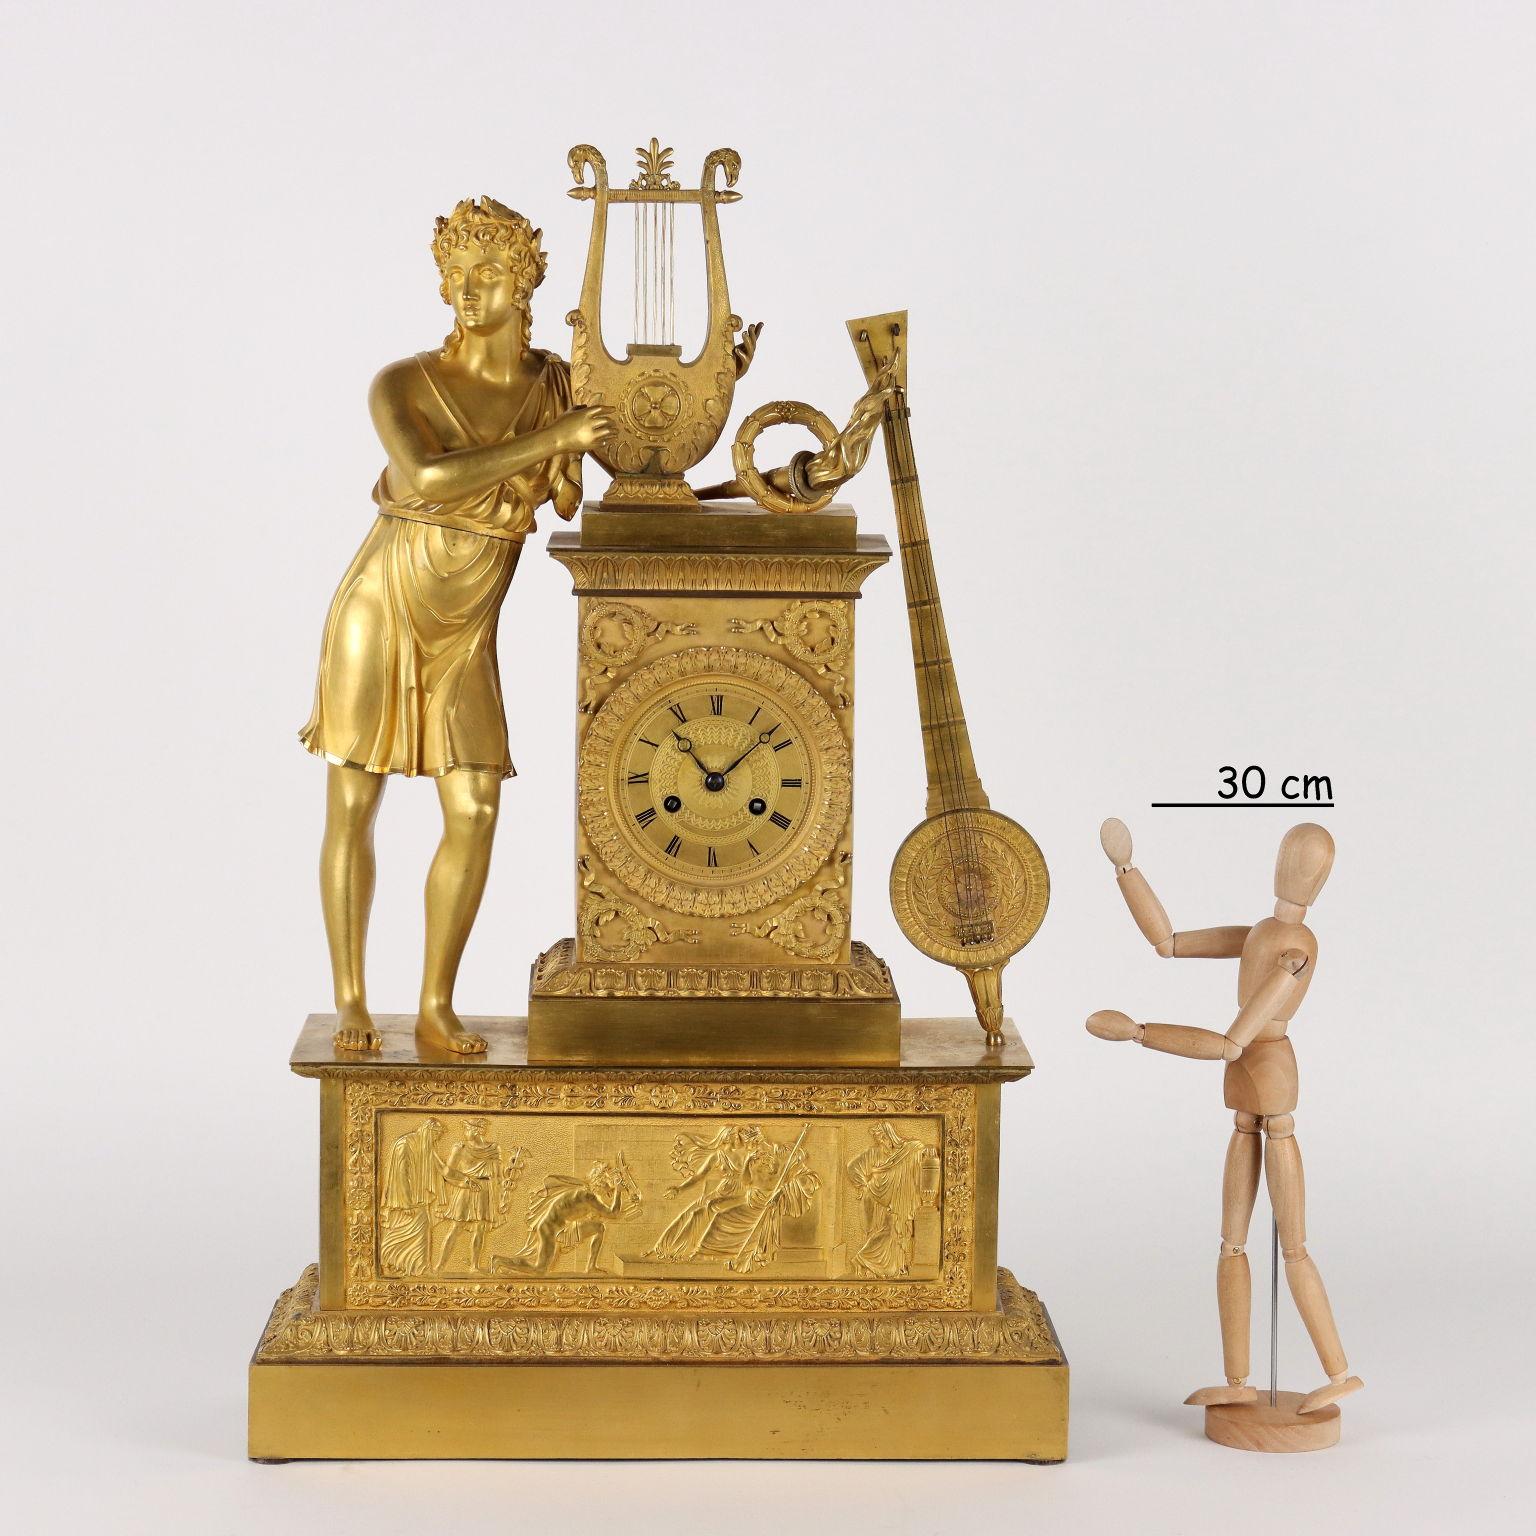 Gilded and chiseled bronze clock. On the large rectangular base there is a scene with mythological divinities in relief on a finely chiseled background. Decorations with plant motifs and repeated motifs. The clock is surmounted by a large statue